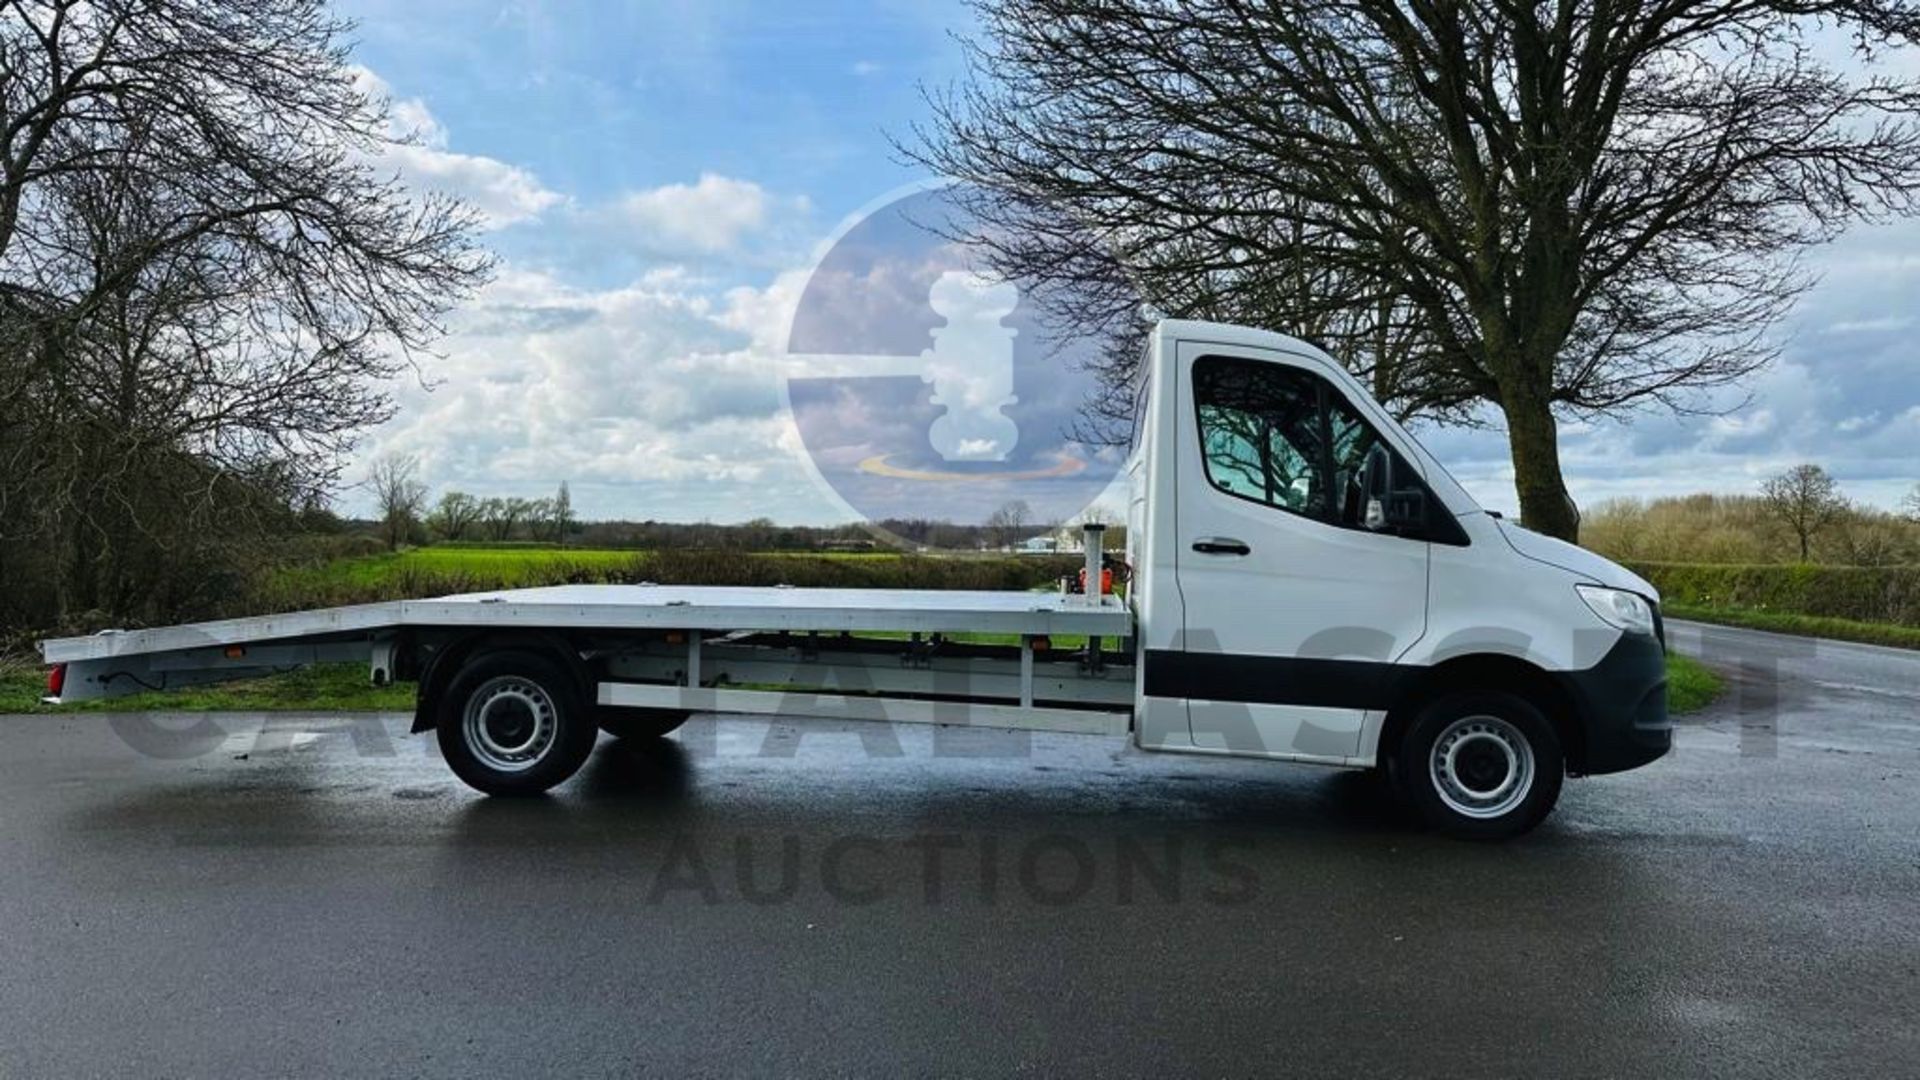 MERCEDES SPRINTER 314CDI "LWB RECOVERY TRUCK" 2019 MODEL - 1 OWNER - NEW BODY FITTED WITH ELEC WINCH - Image 16 of 37